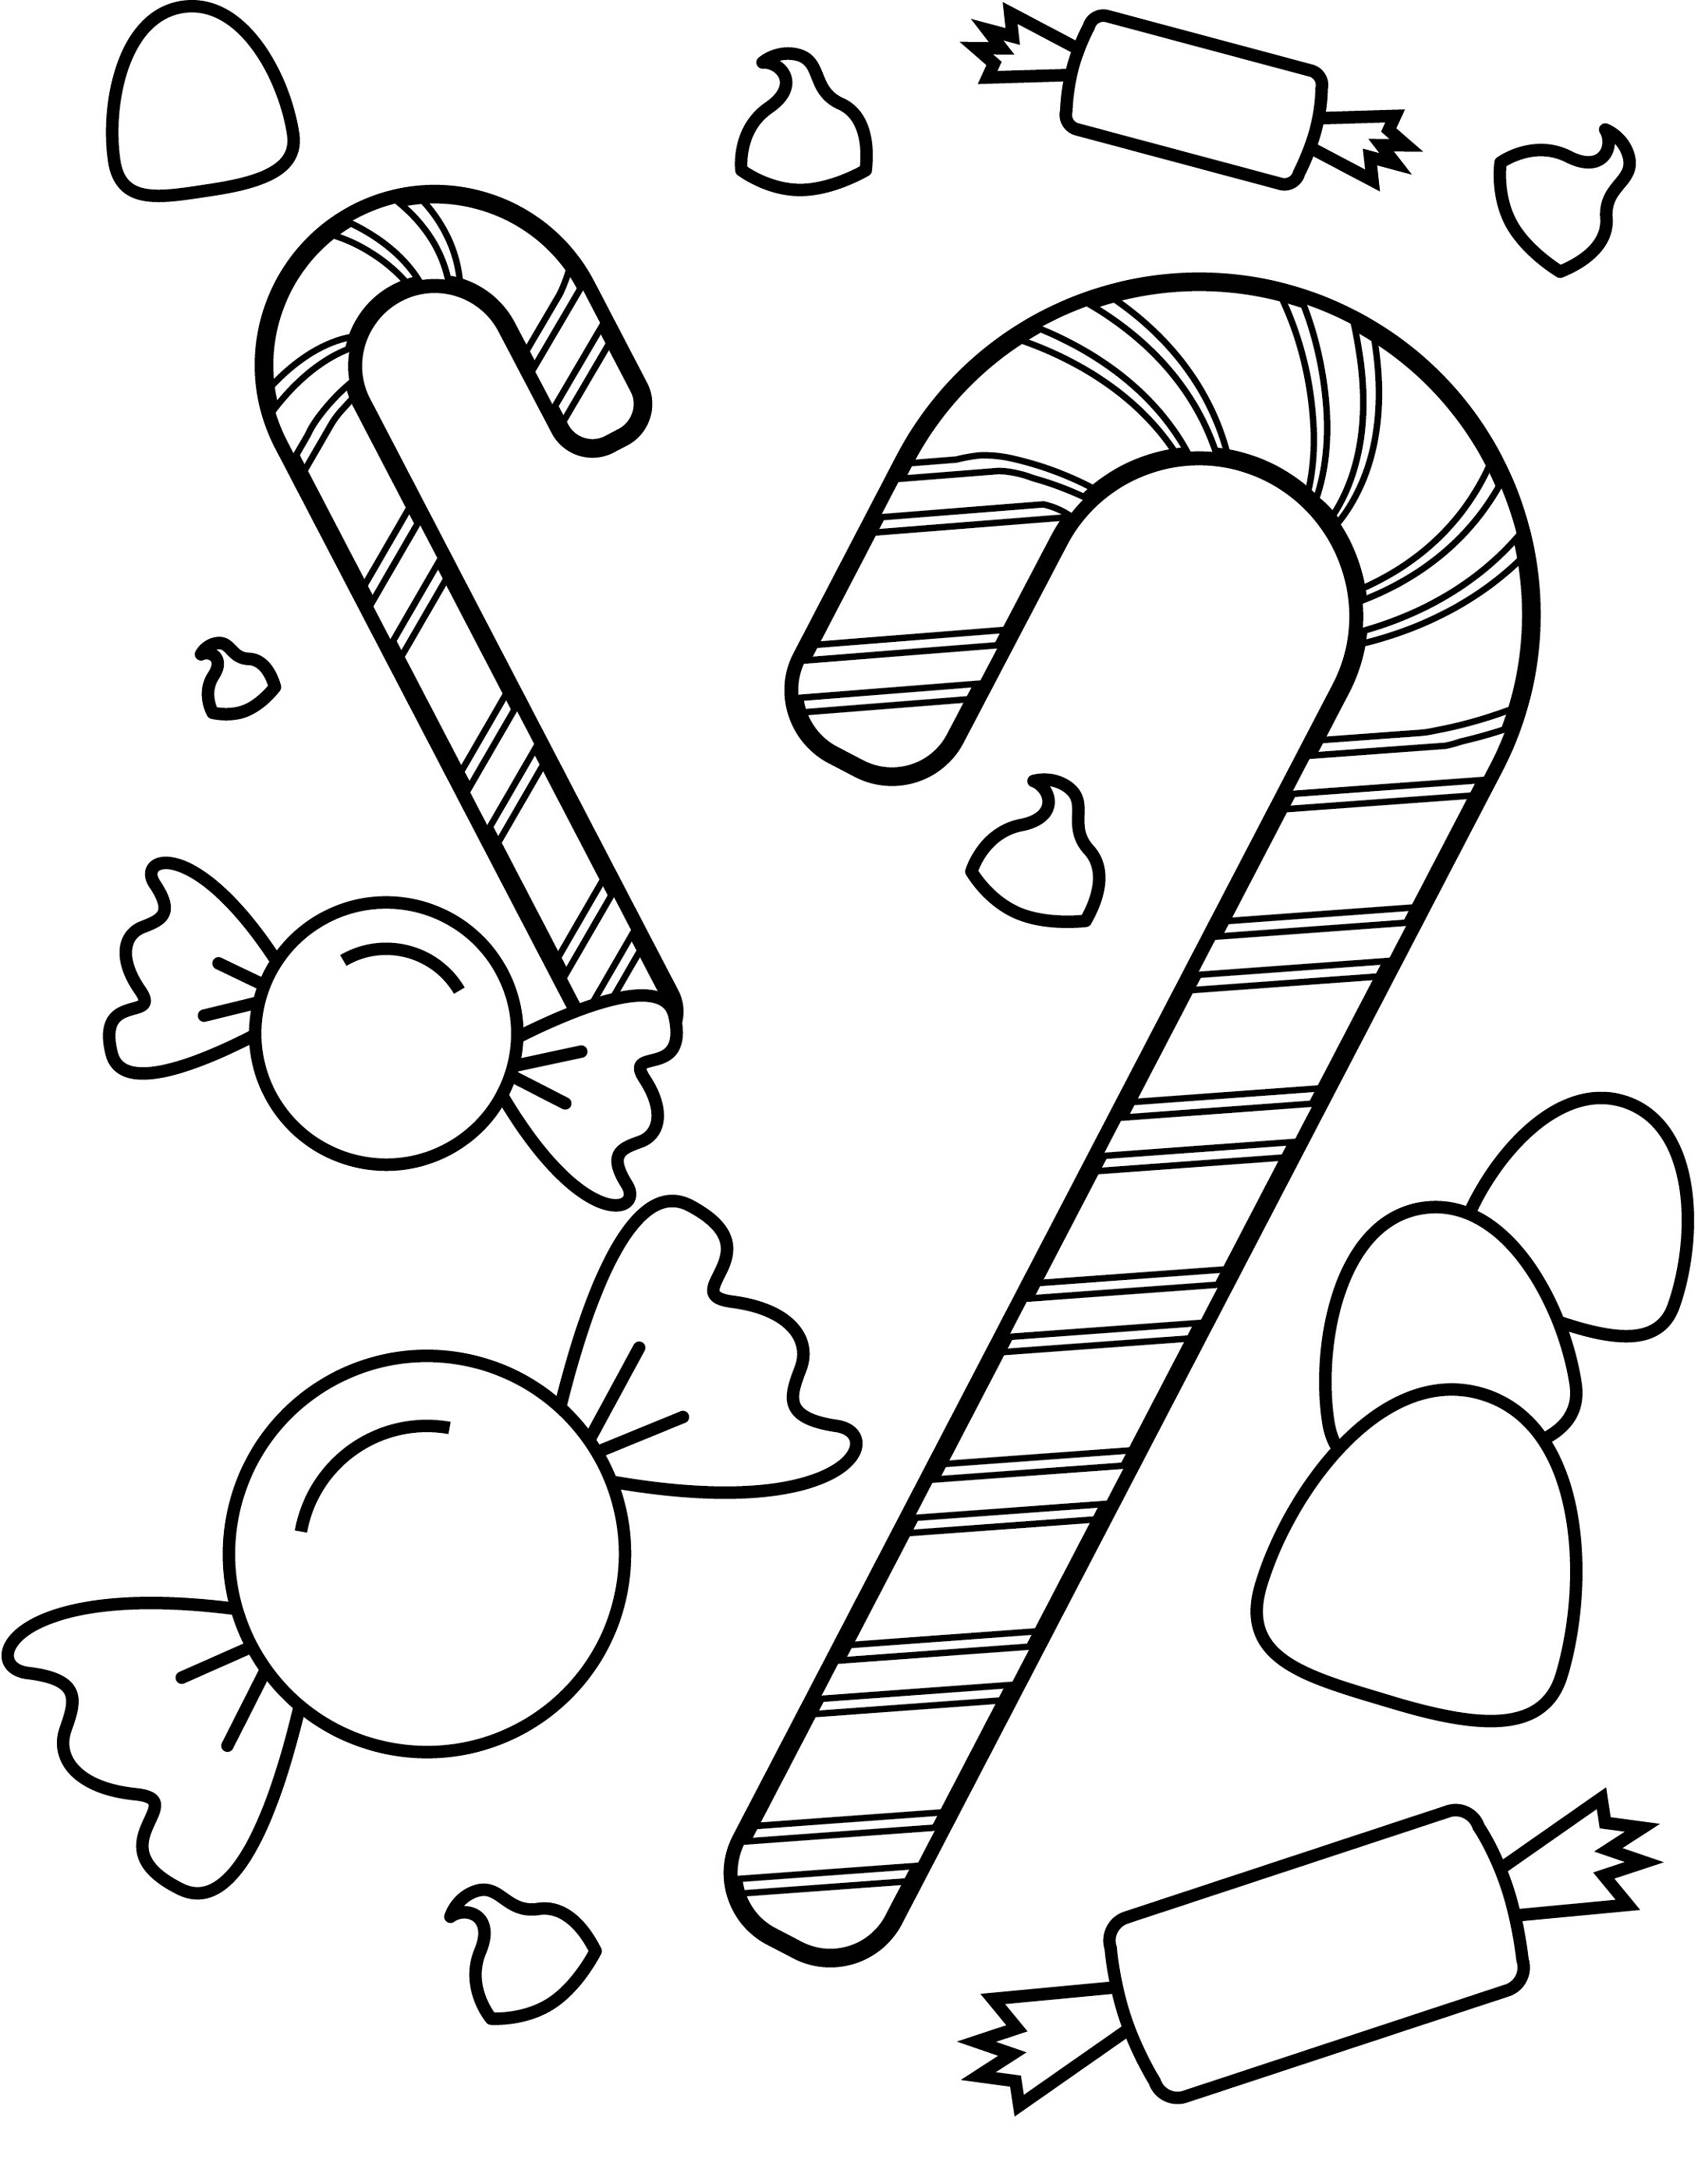 printable-candyland-coloring-pages-printable-word-searches